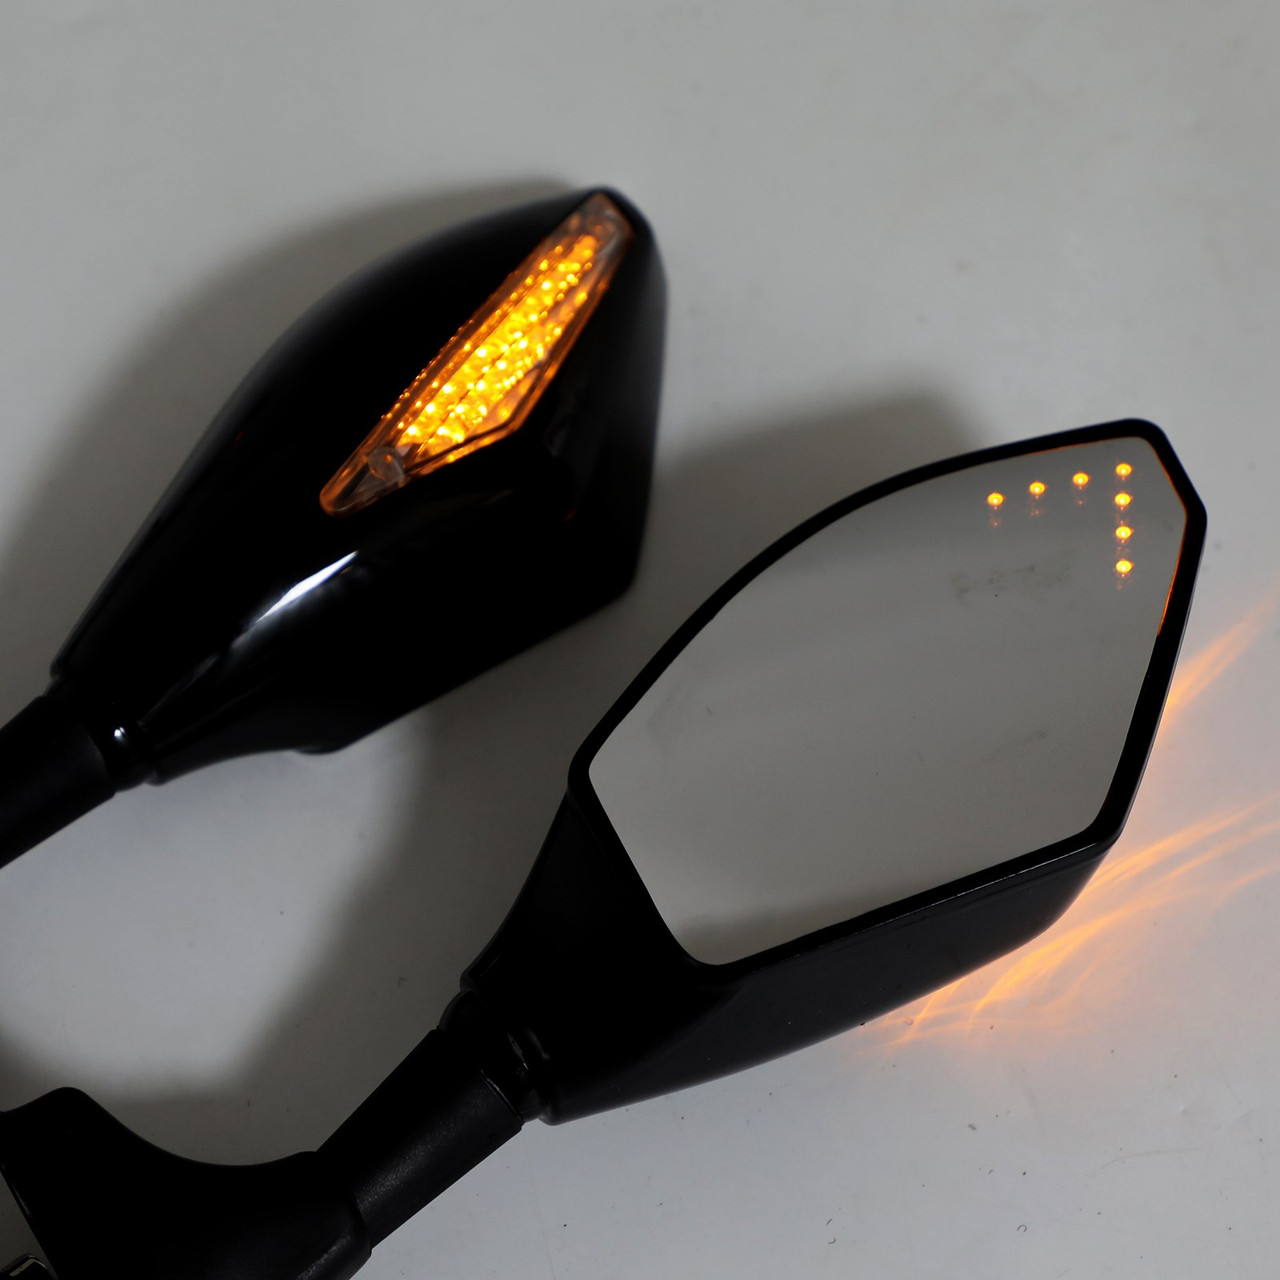 Black Rear View Side Mirrors With LED Turn Signals Fit For Kawasaki ZX-6R ZX636 ZX6RR 98-06 ZX10R 04-07 ZX750 ZX7 ZX-7R 99-02 Black